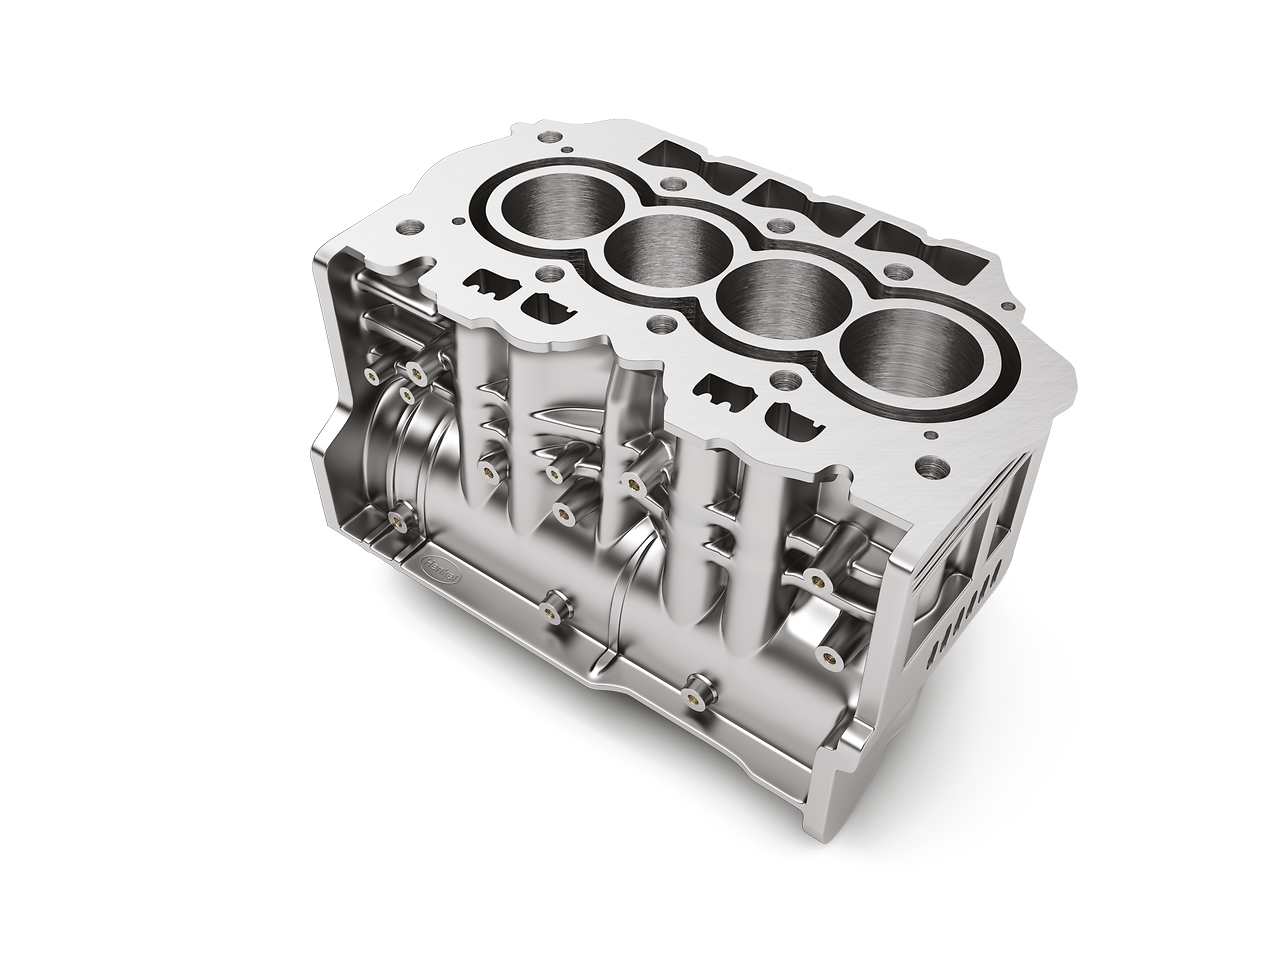 
The lubricant concentrate Bonderite L-CA CP 791 makes it possible to remove light metal castings such as aluminum engine blocks from the die-casting mold easily and without residue.